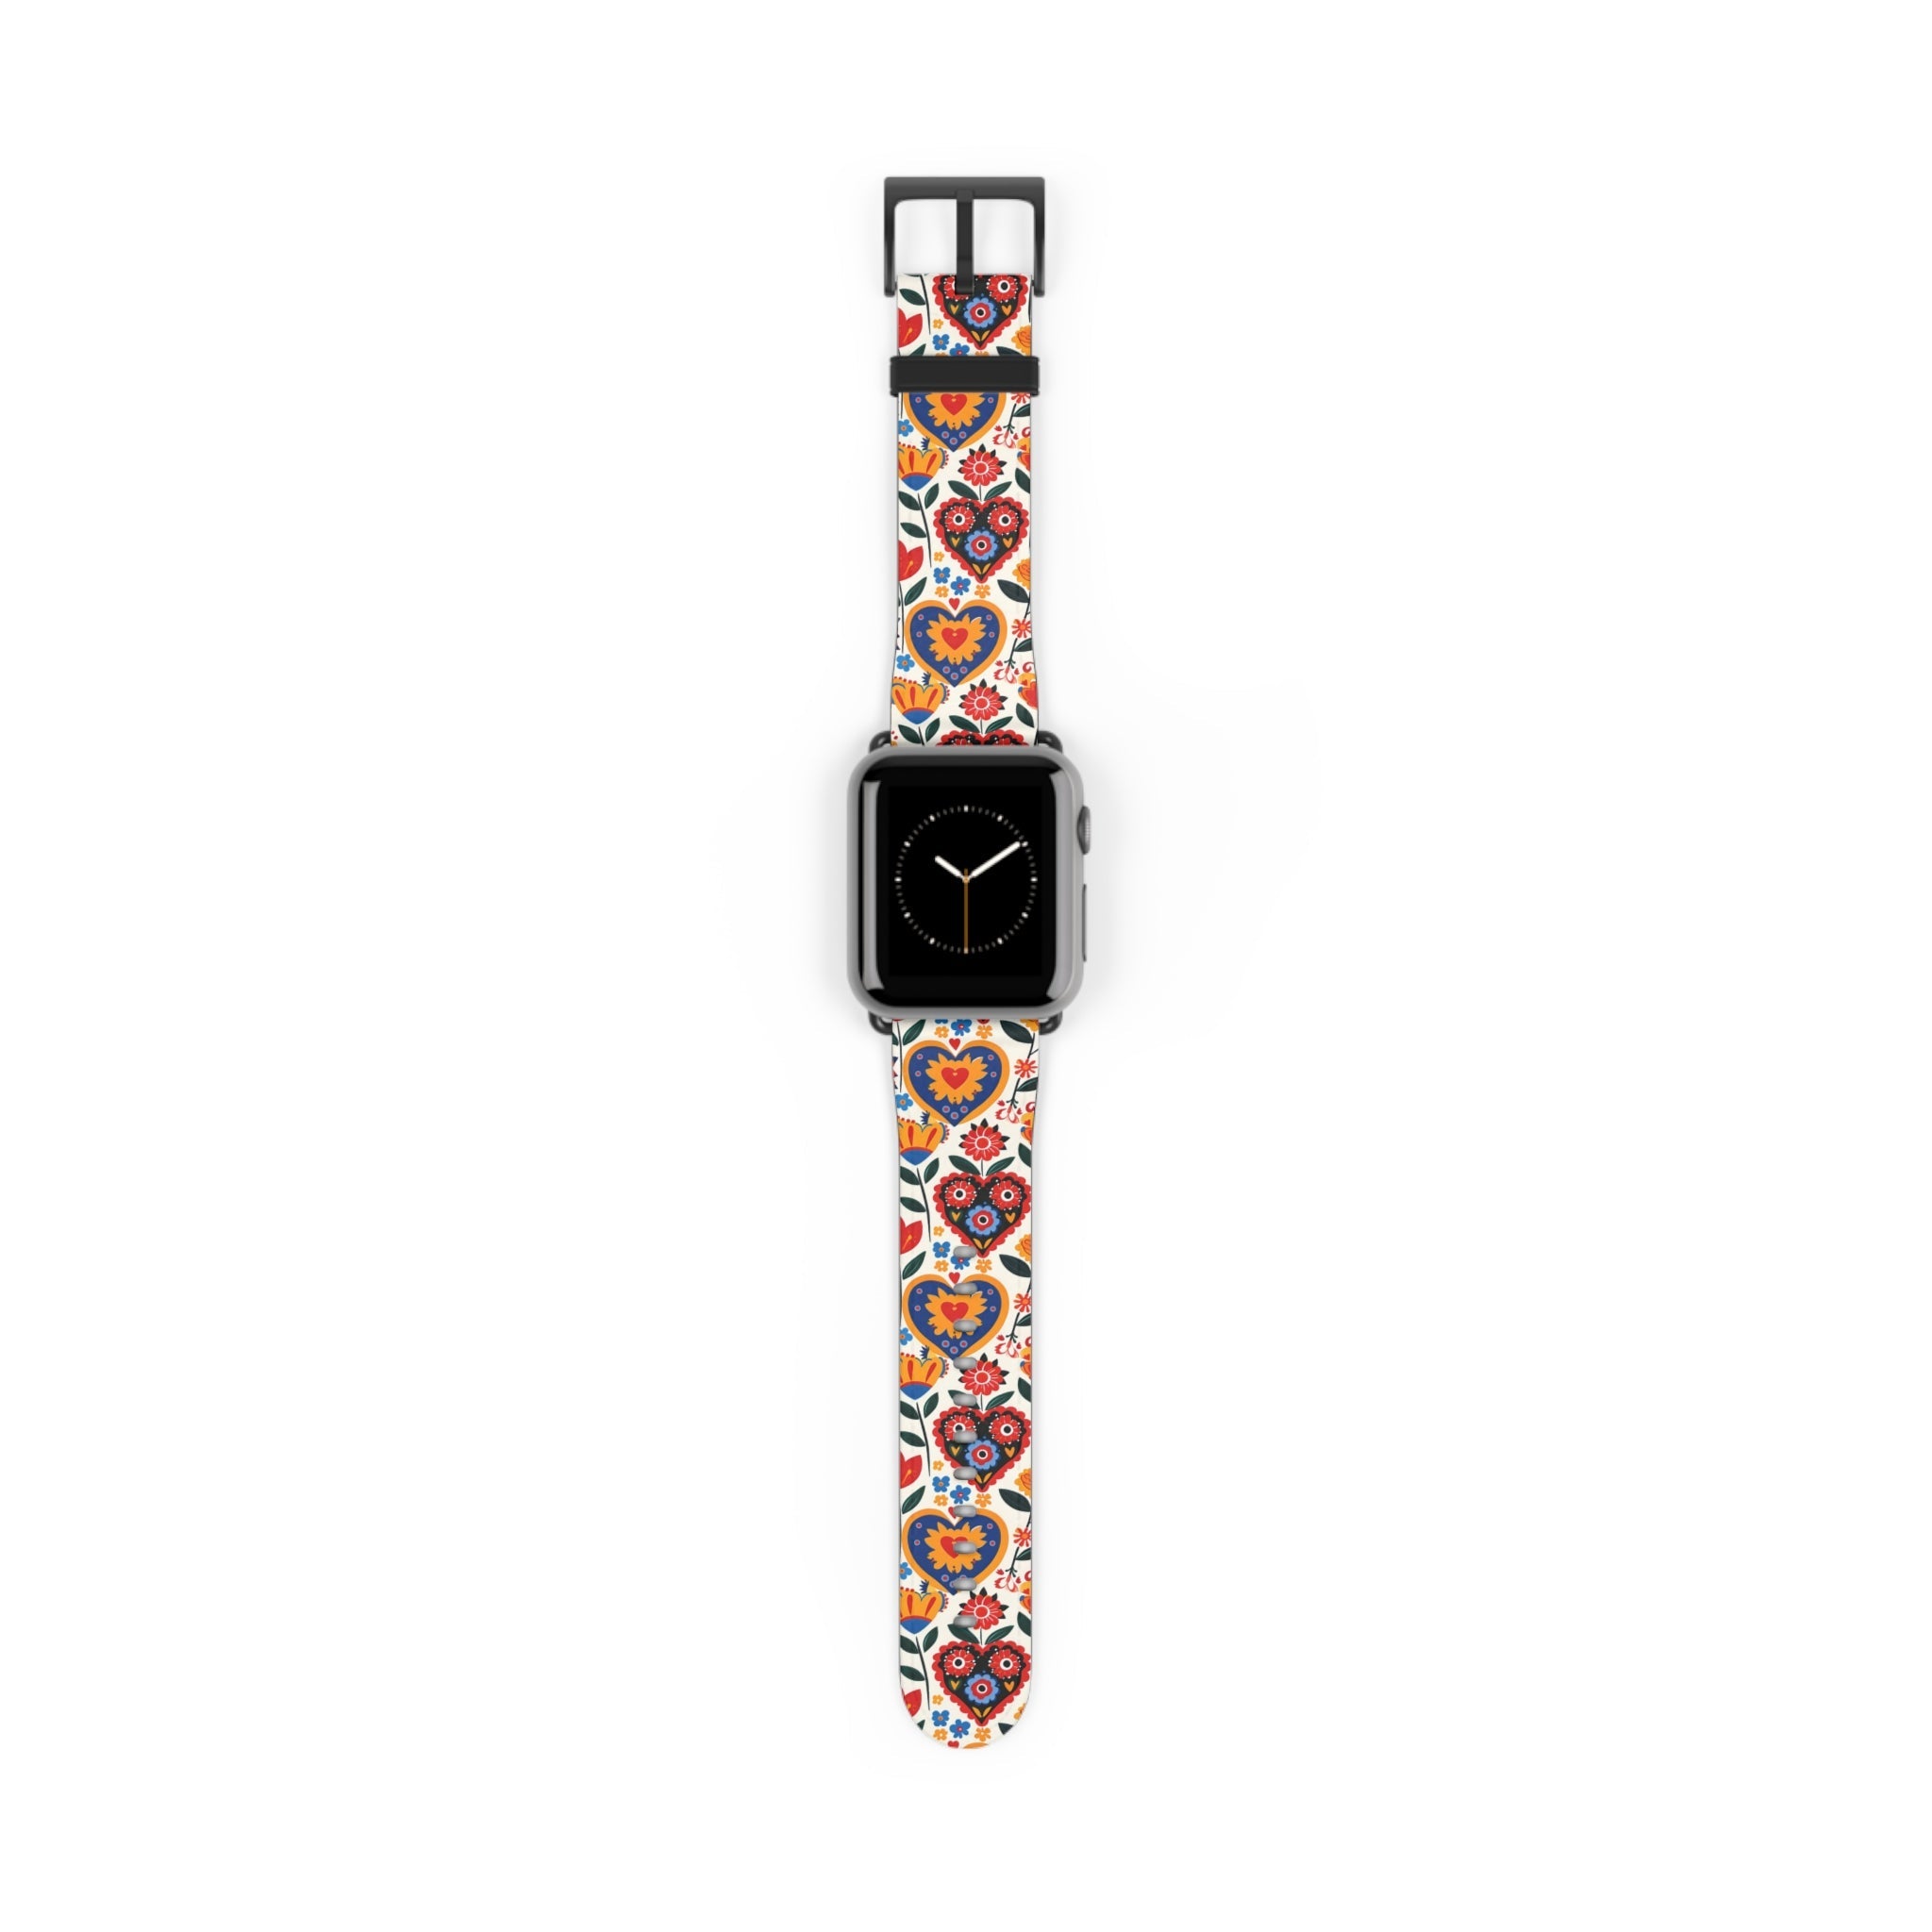 Whimsical Hearts: Bloomed Affections - Apple Watch Strap - Pattern Symphony